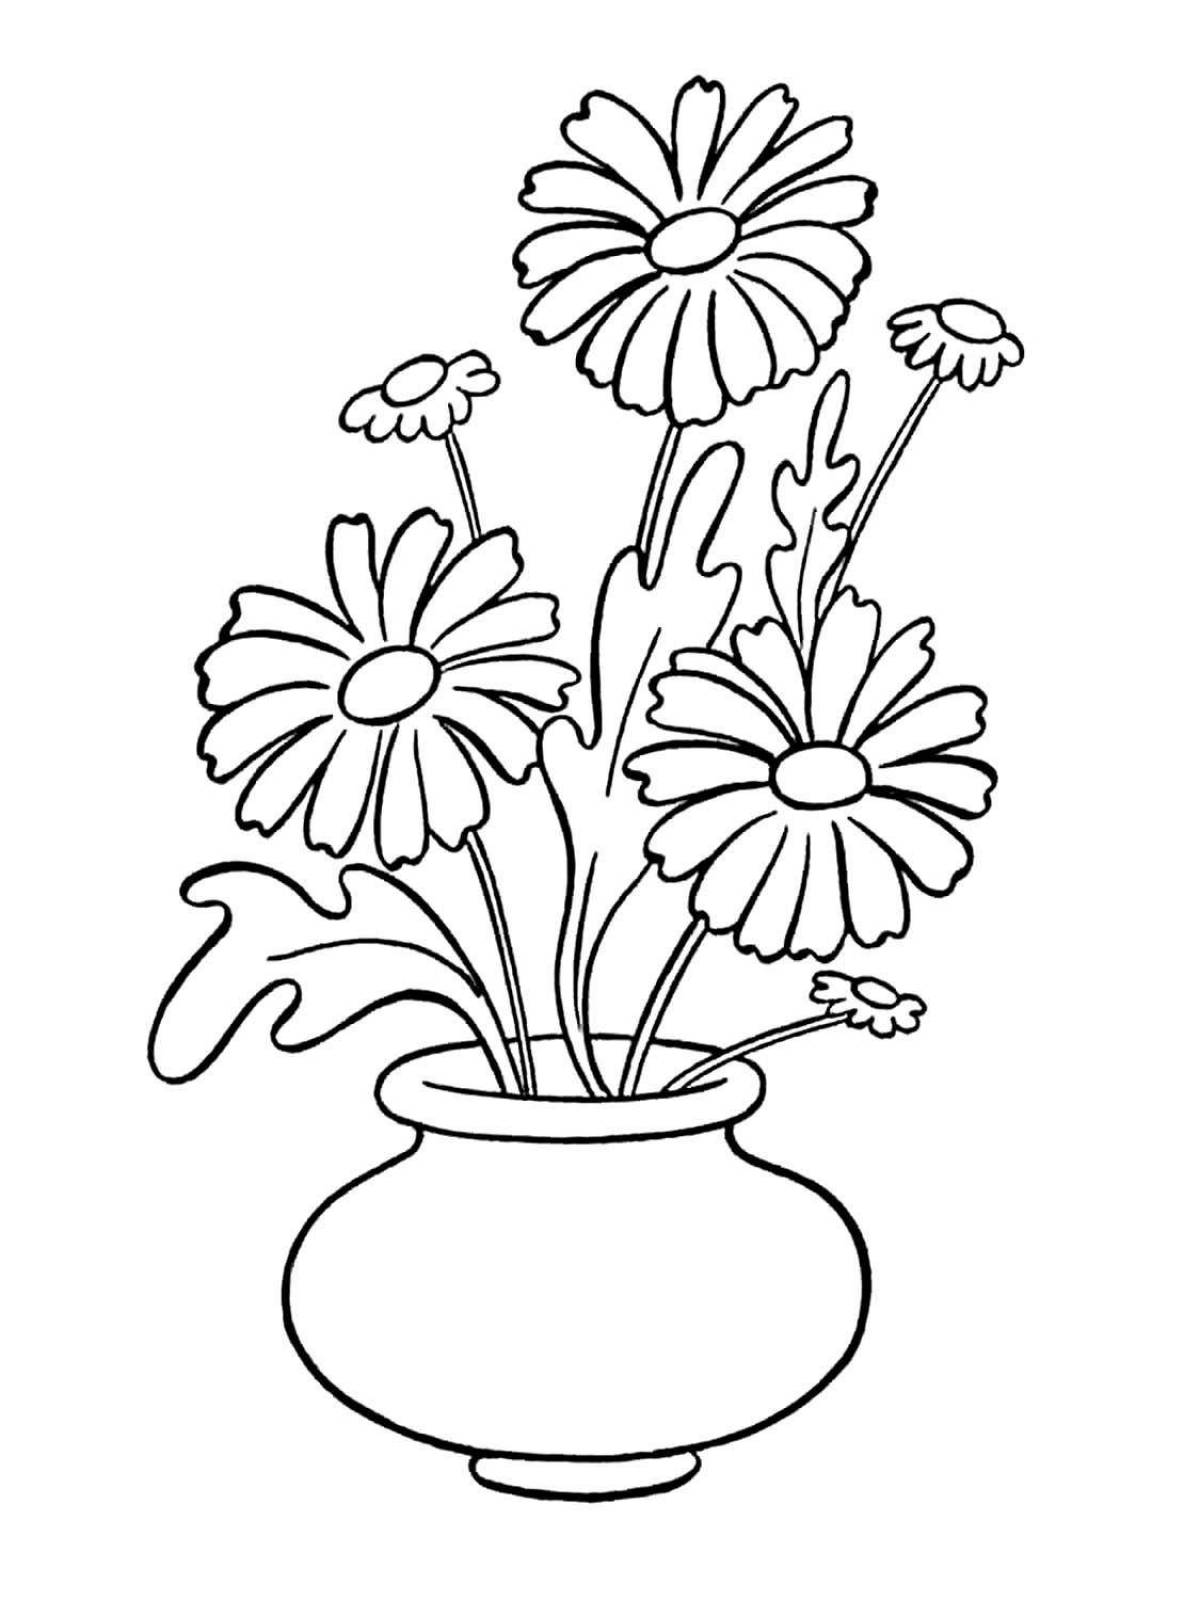 Joyful vase of flowers coloring book for children 5-6 years old